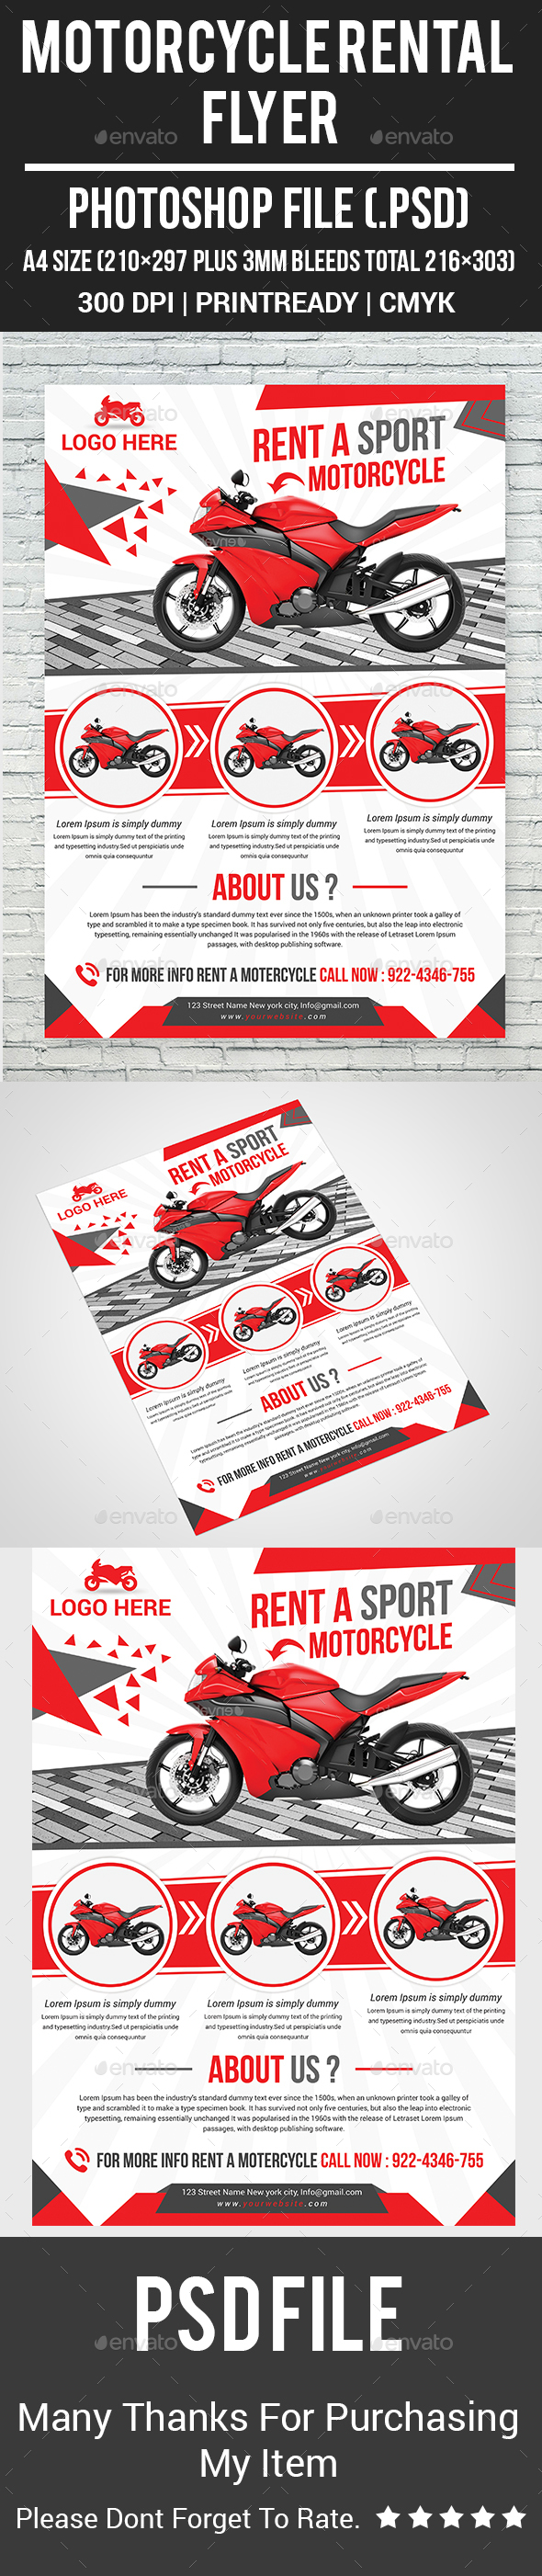 motorcycle-event-flyer-templates-dondrup